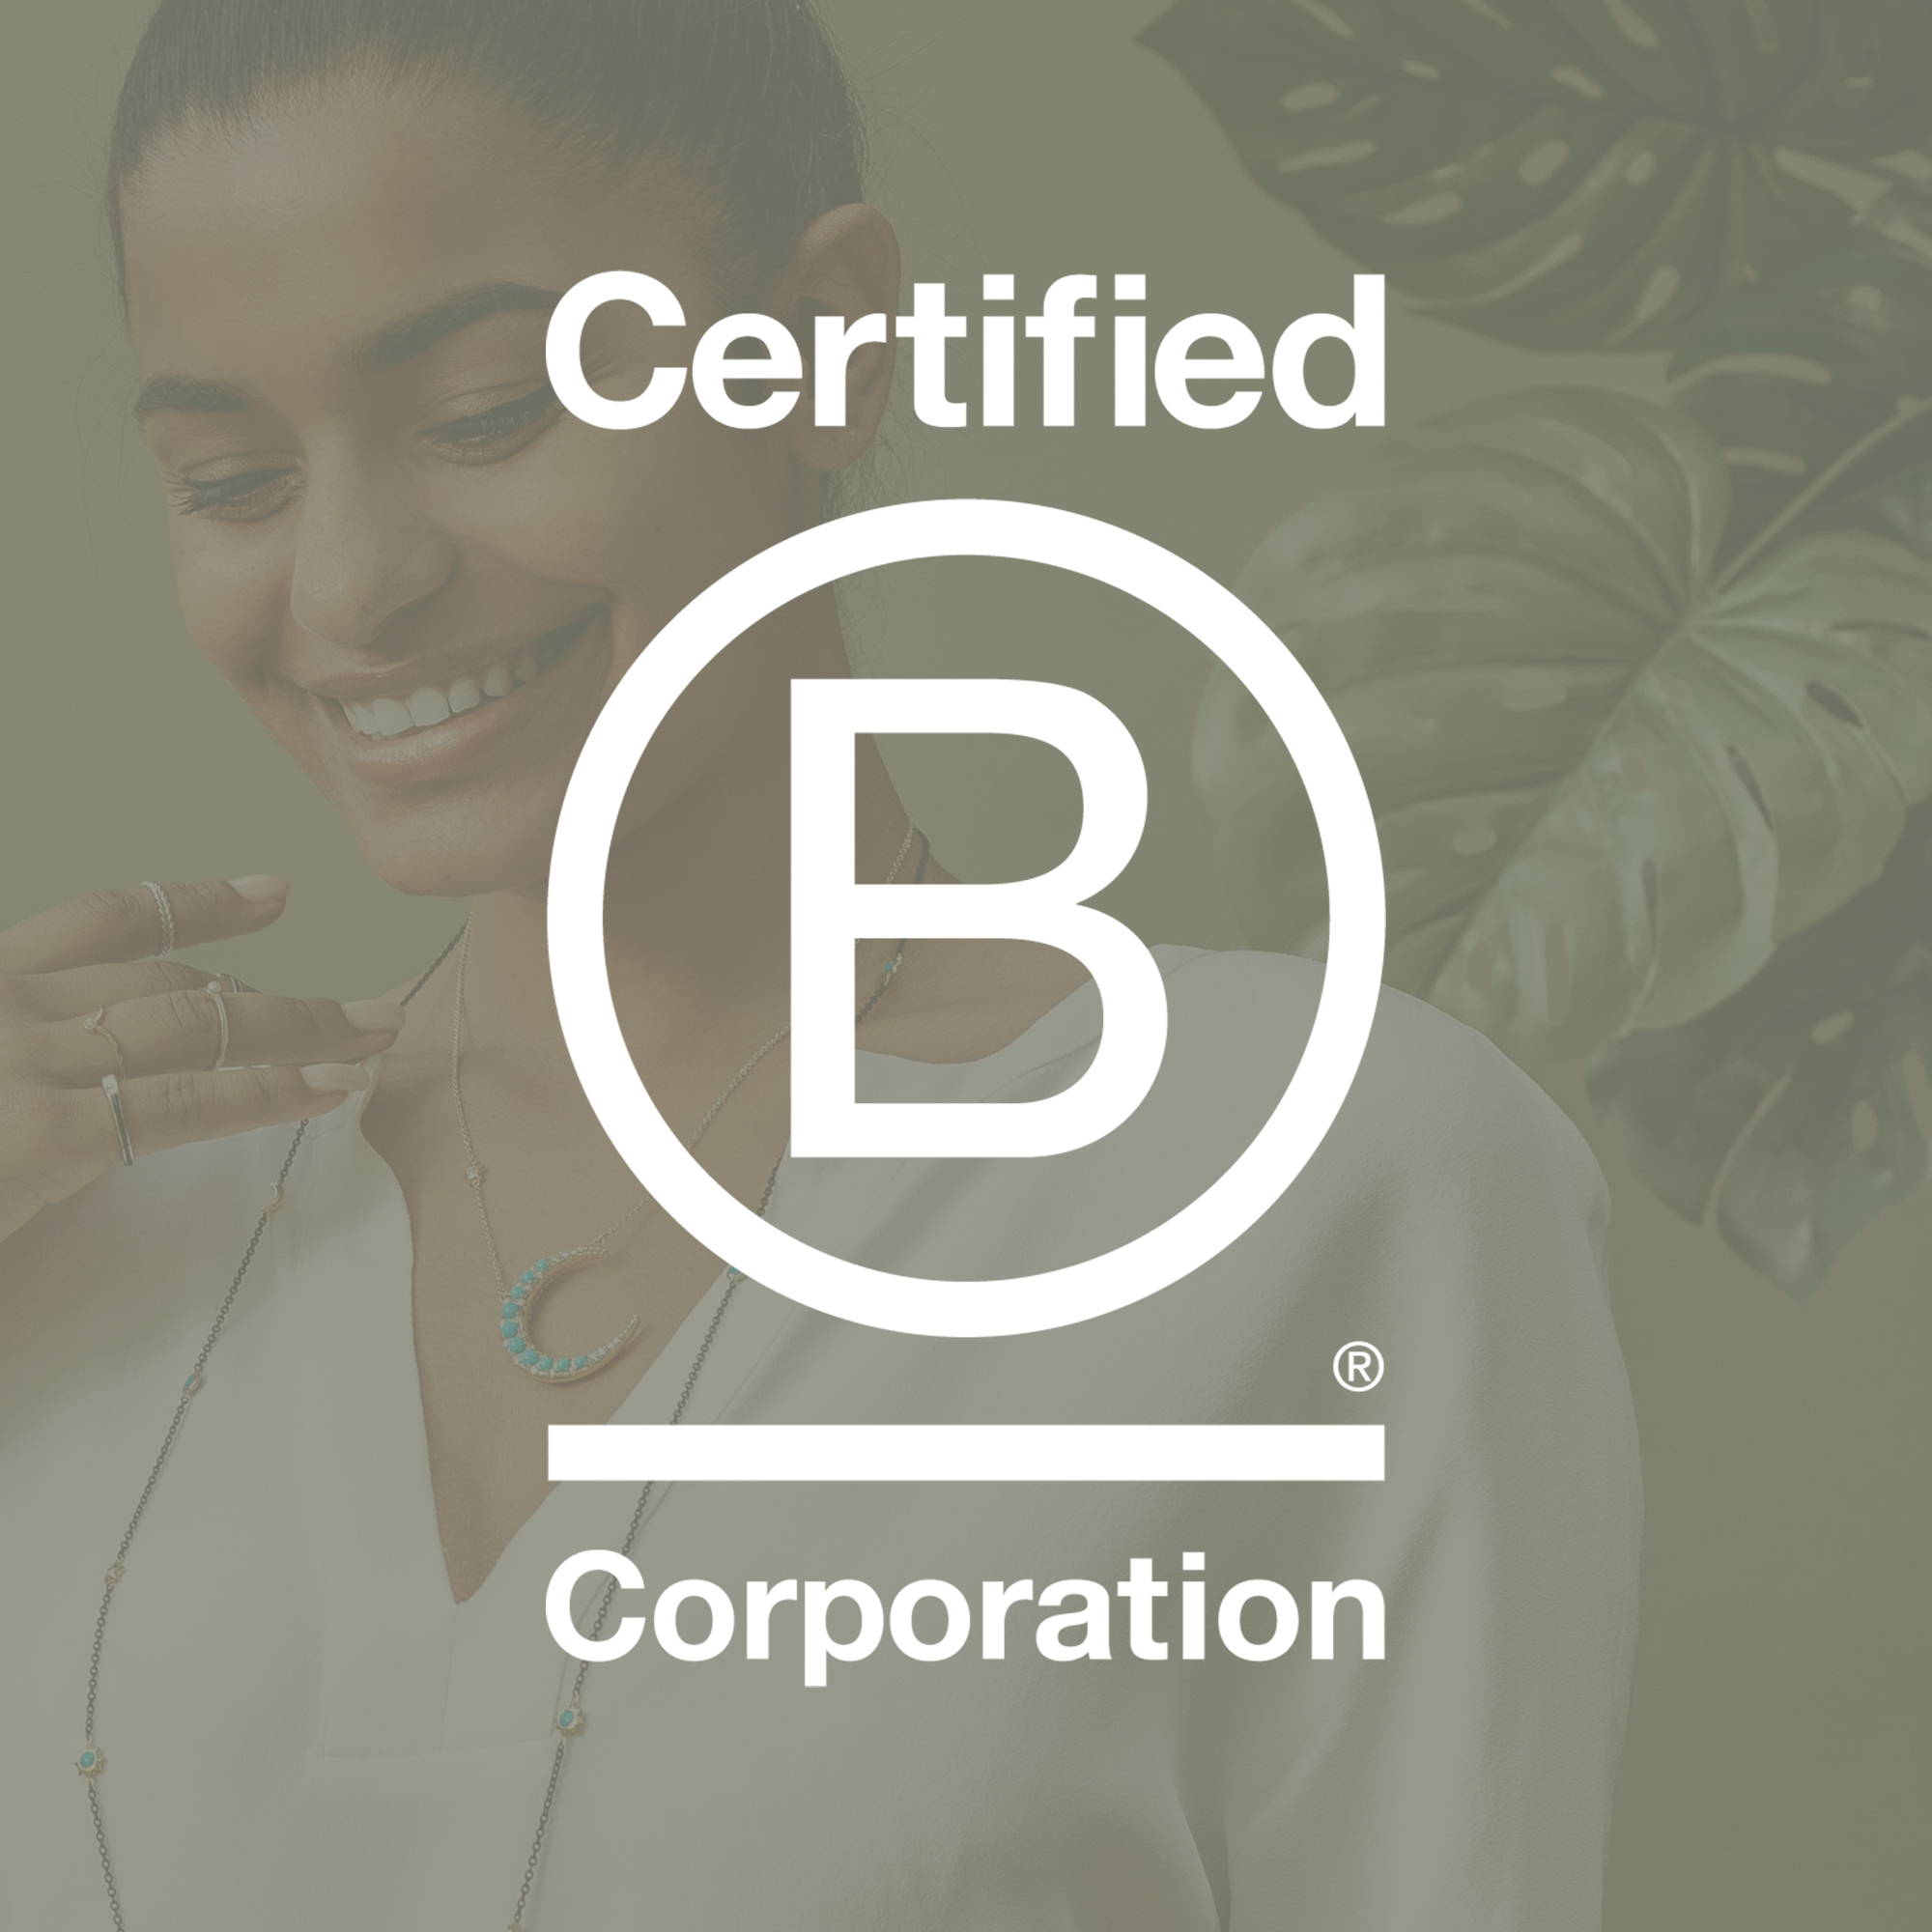 WE ARE A CERTIFIED B CORPORATION®